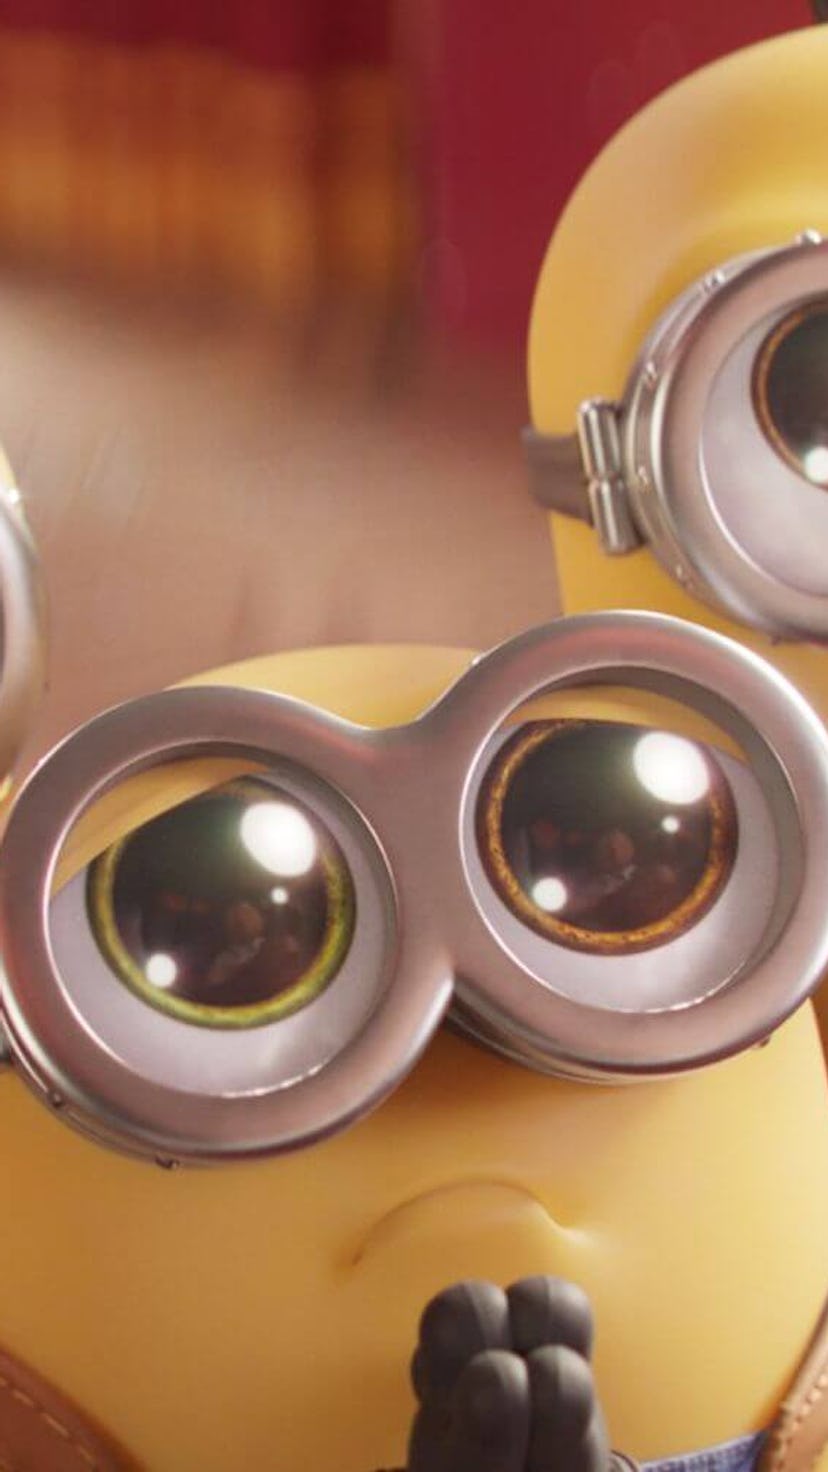 The 'Minions: The Rise of Gru' movie was released in theaters on July 1.